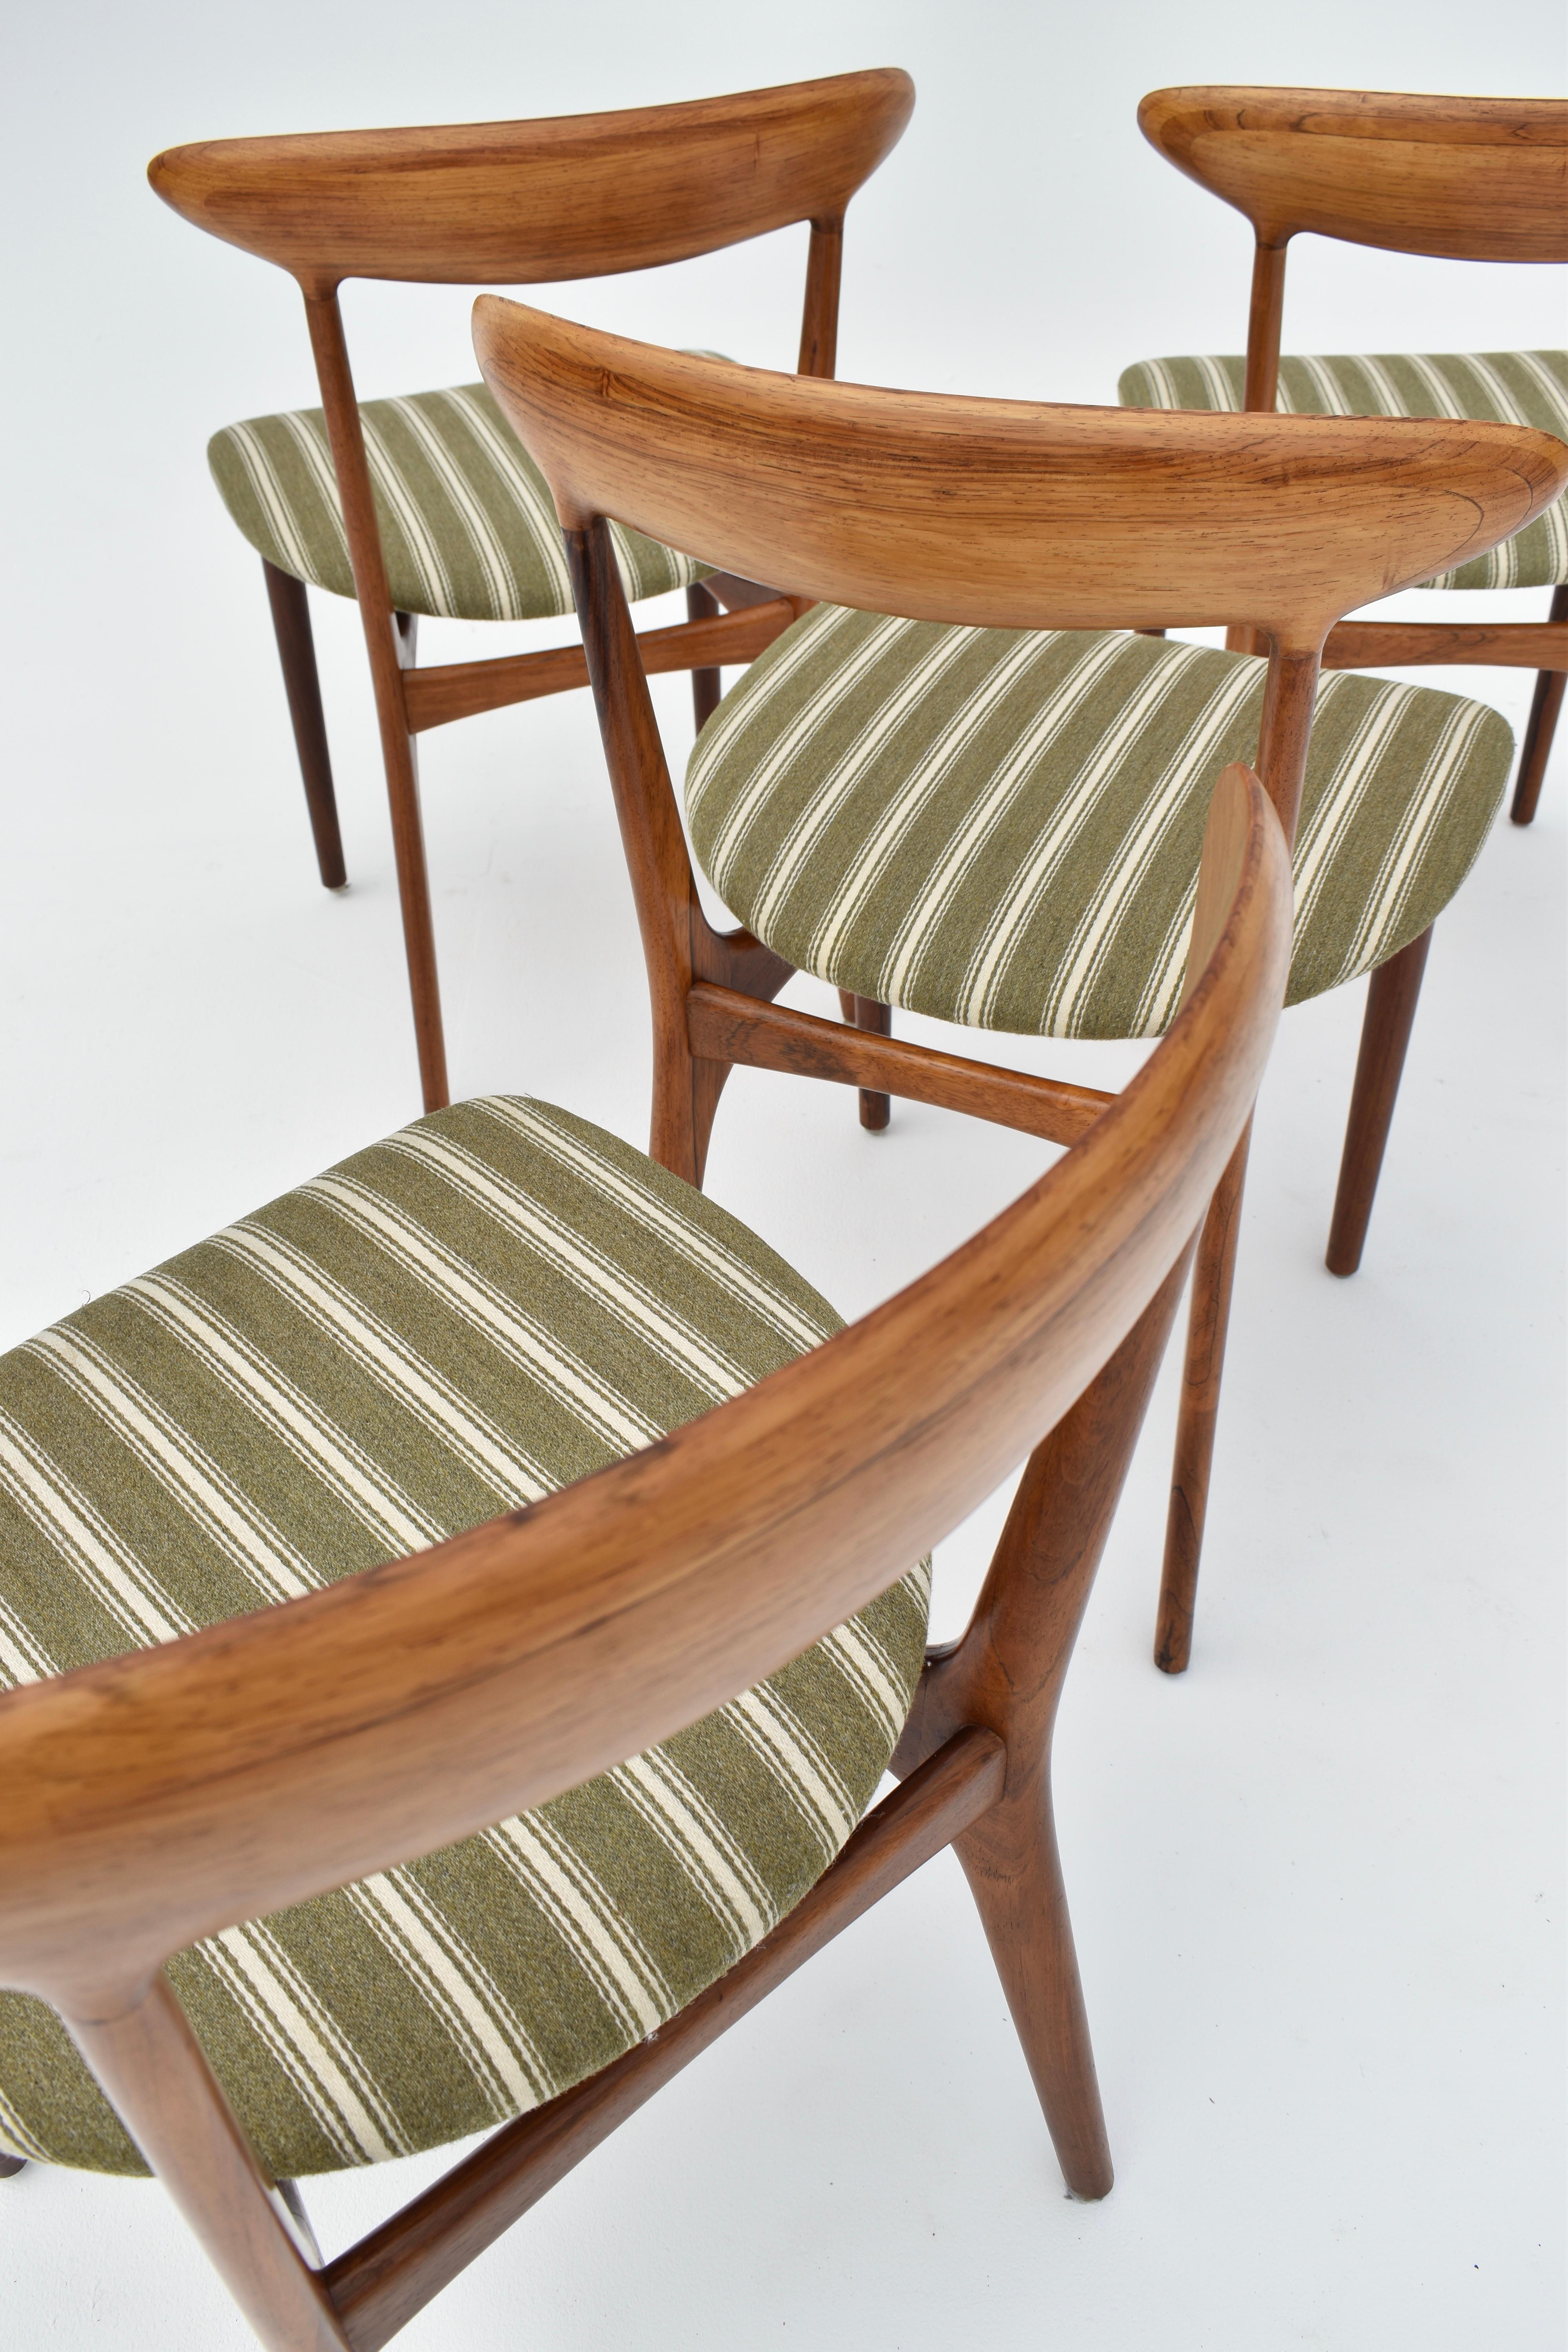 Exquisite and rarely seen dining chairs designed in 1955 by Kurt Østervig for Brande Møbelindustri.

A very pretty and elegant design with a wonderful organic form. This set of four is a true set with consecutive veneers to the backrests. The